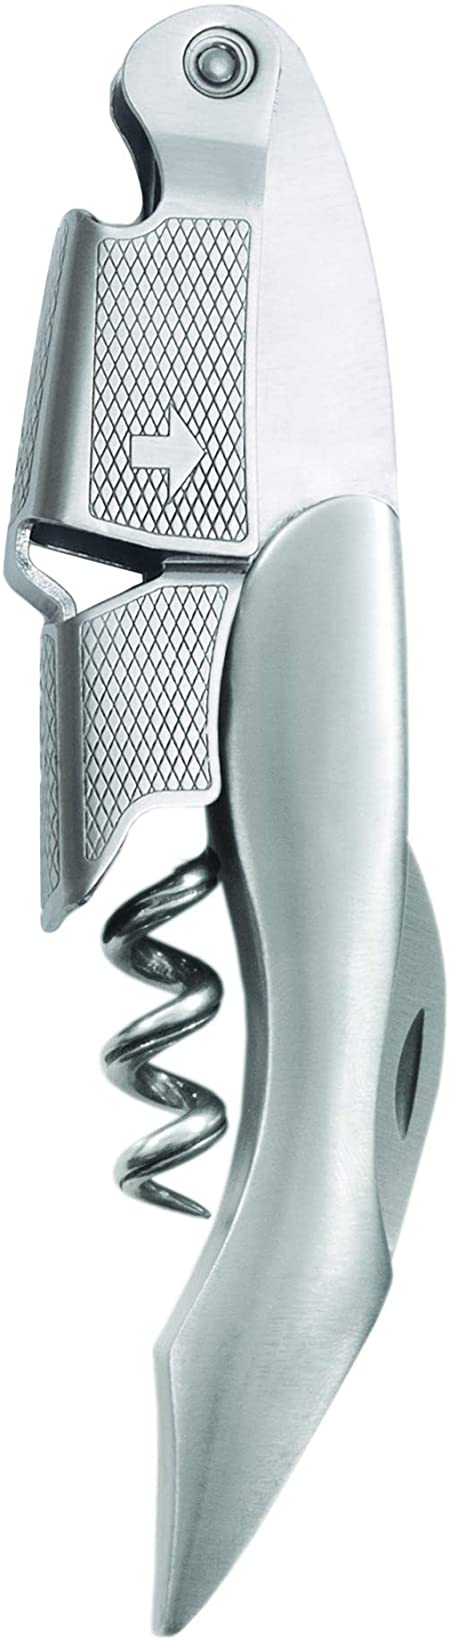 True Fabrications 770 Deluxe Professional Corkscrew, Stainless